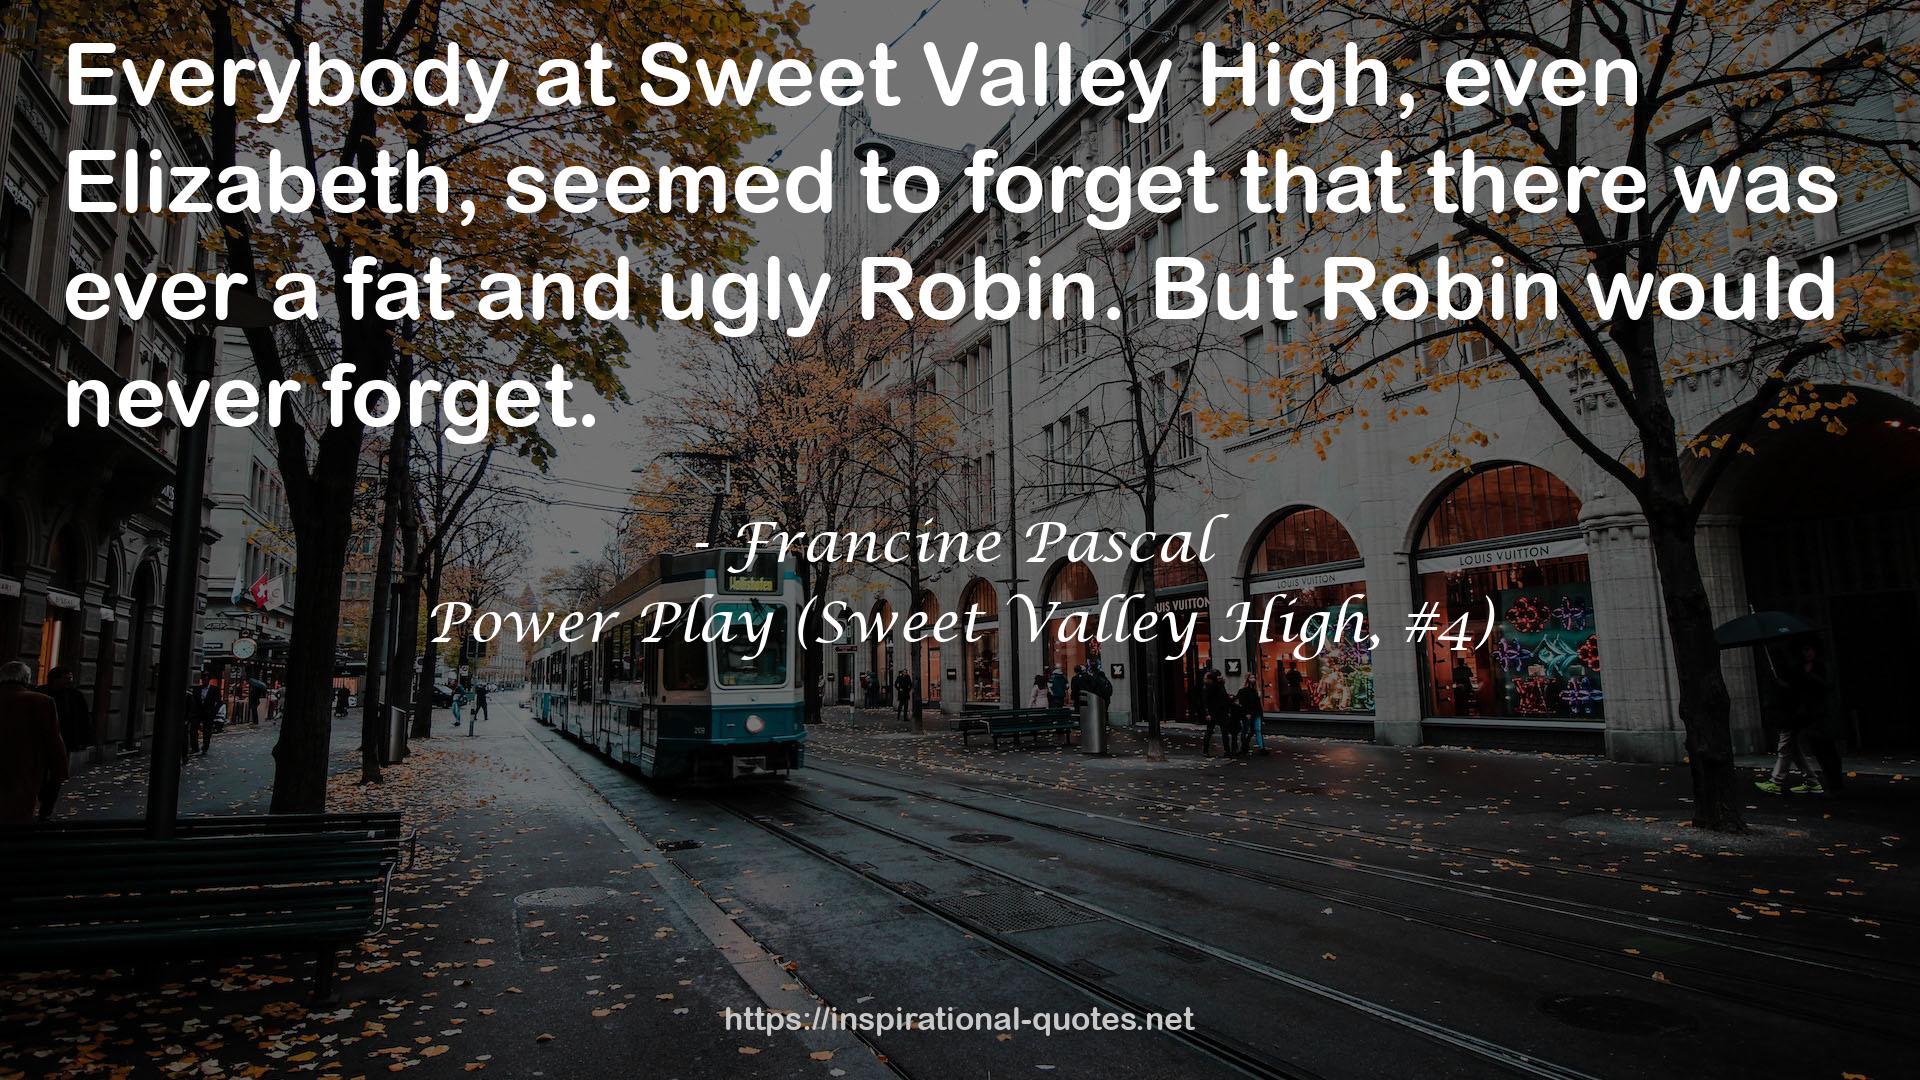 Power Play (Sweet Valley High, #4) QUOTES